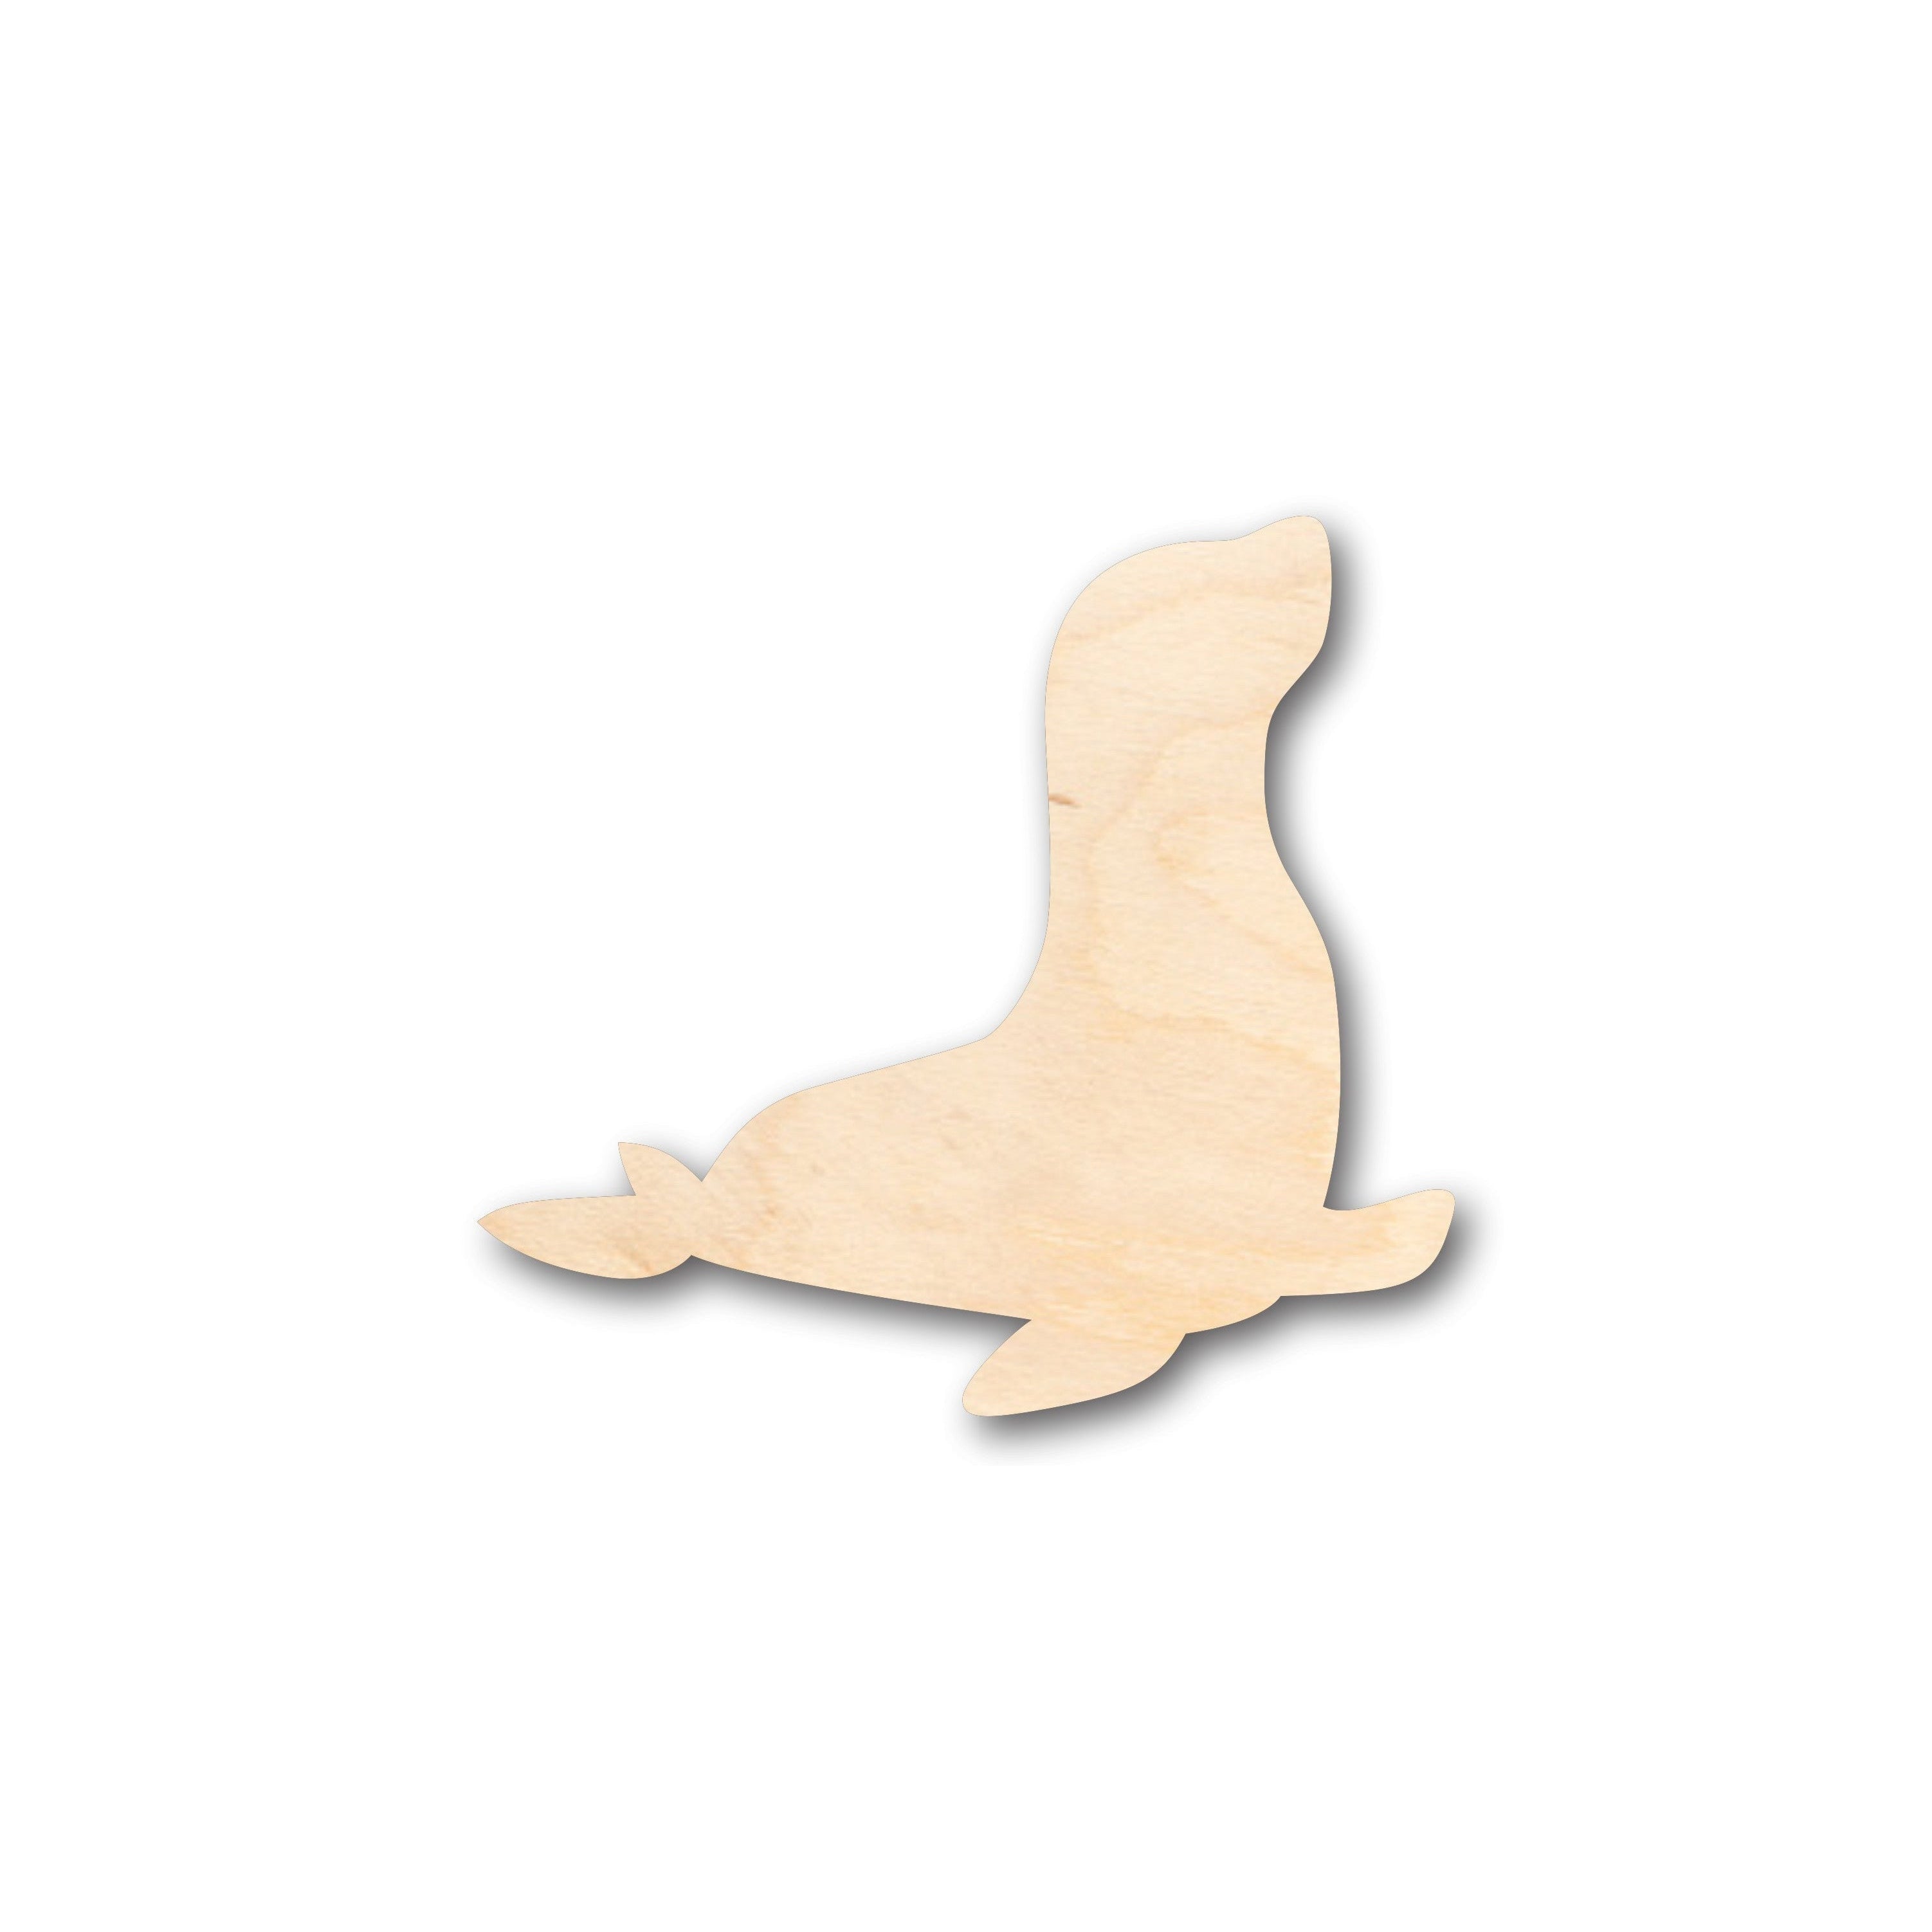 Unfinished Wood Seal Shape - Craft - up to 36